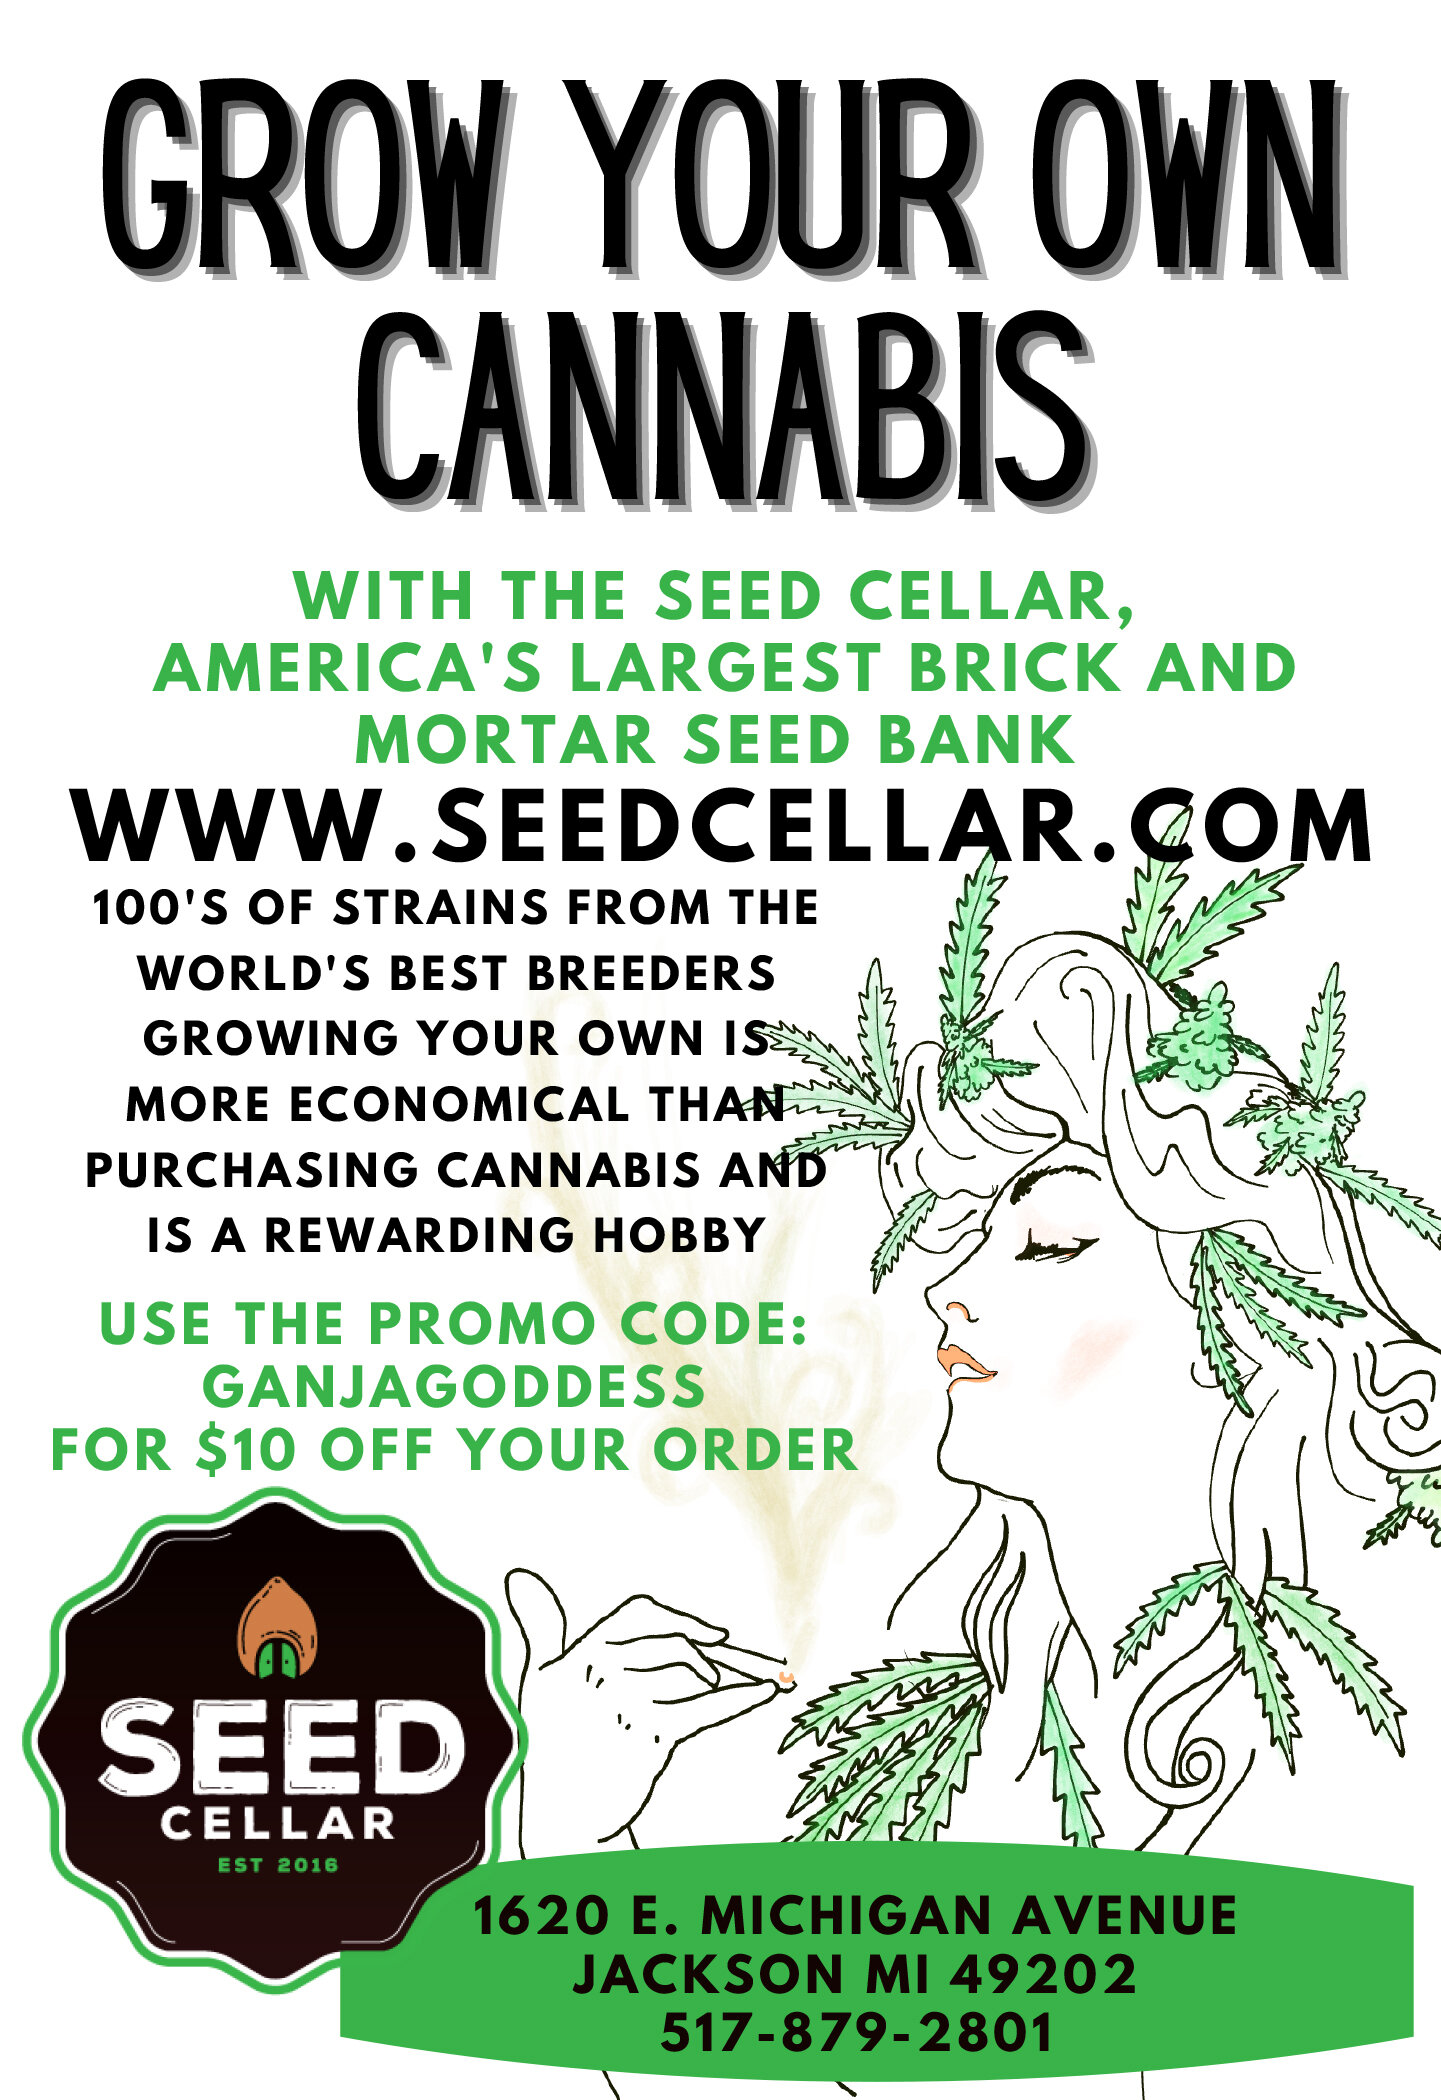 Buy Seeds Online from Seed Cellar for the Best Cannabis!